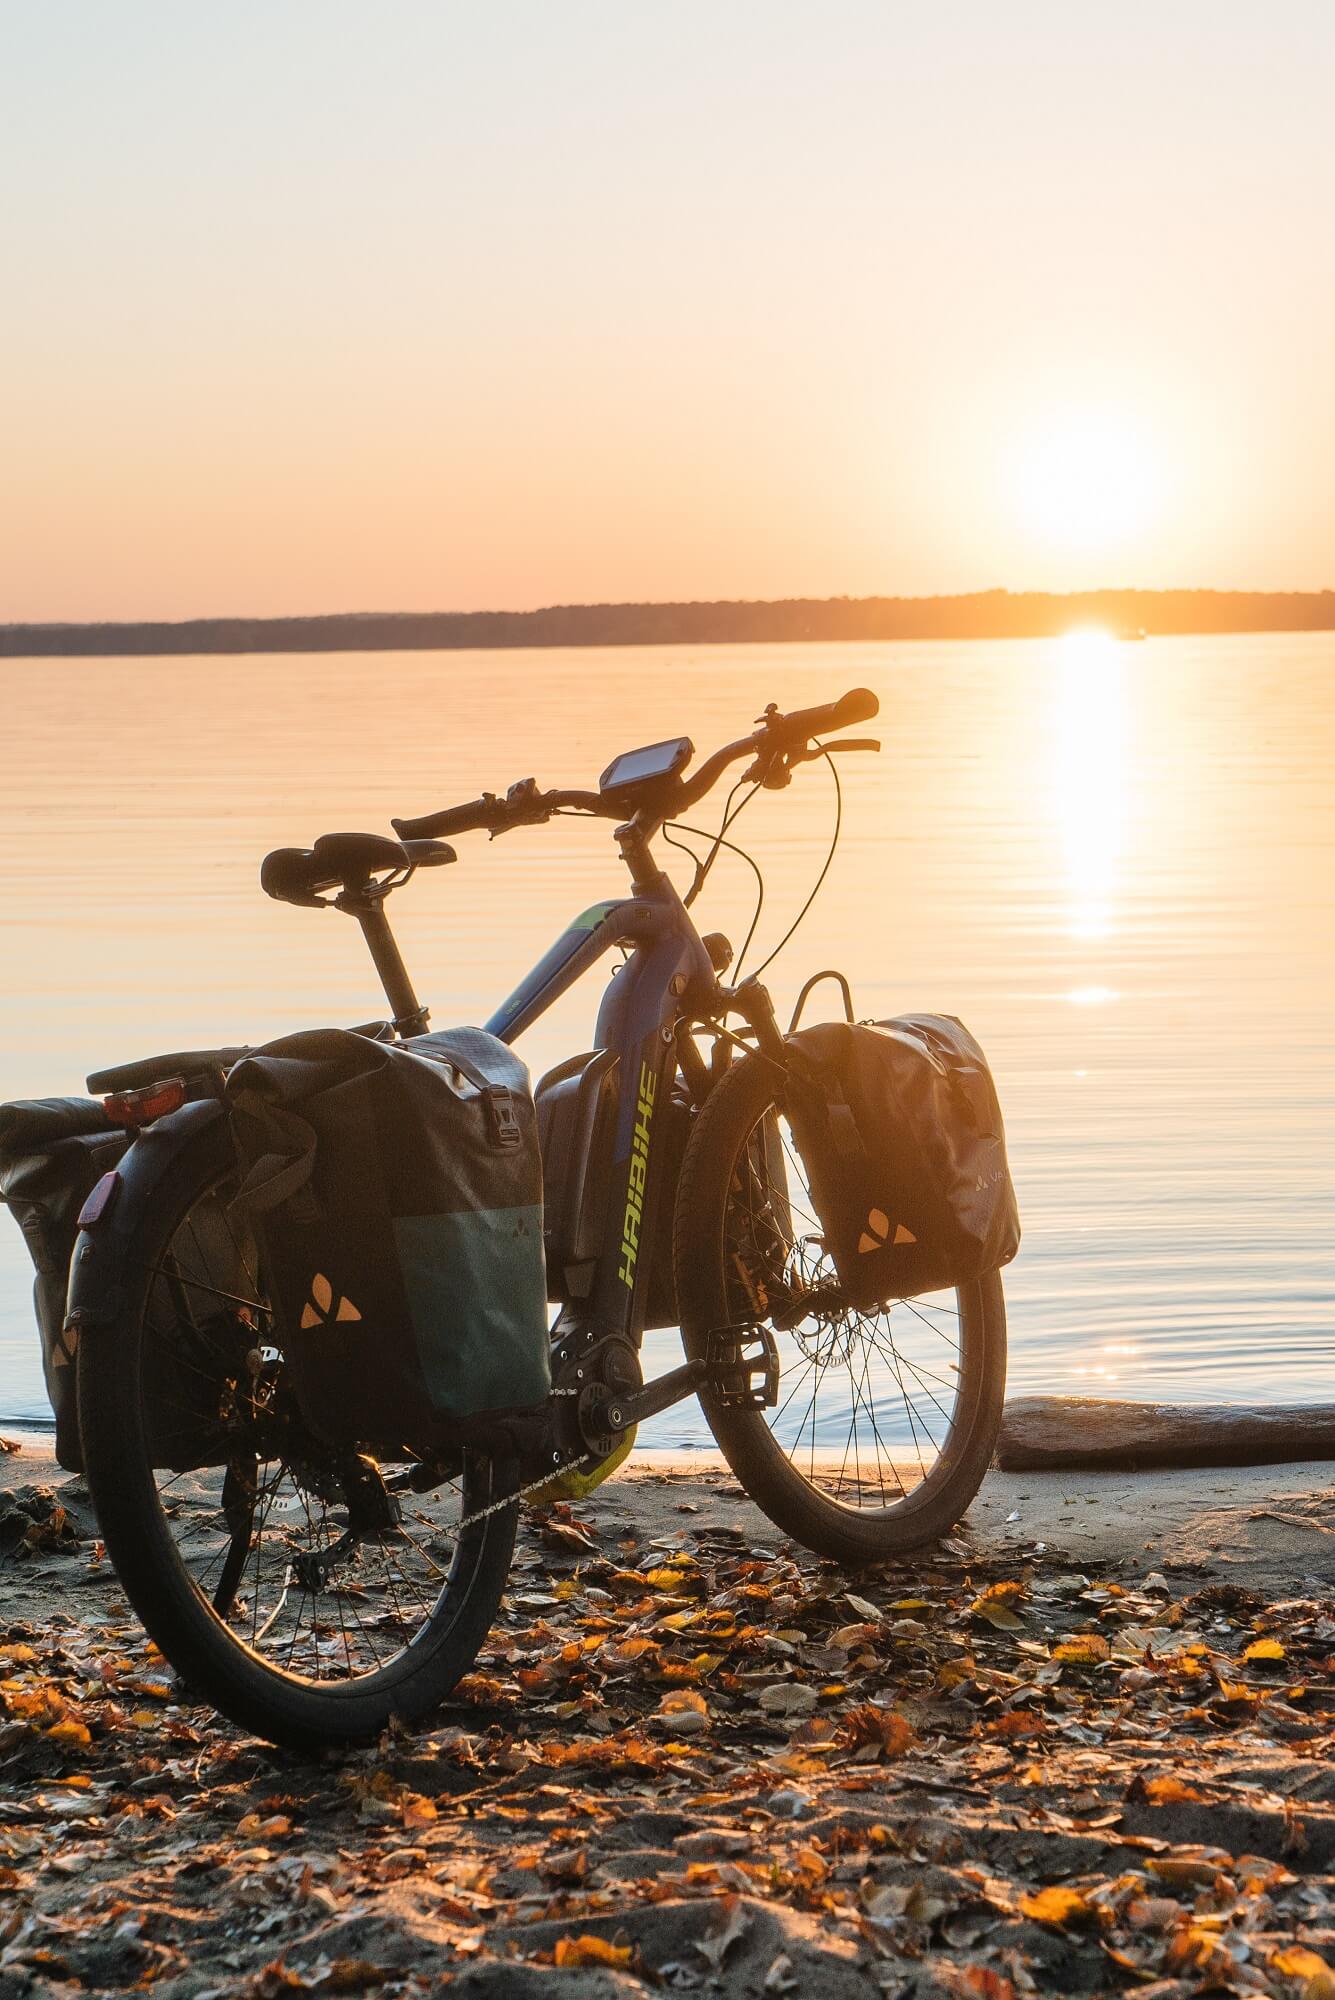 Trekking bike in front of a lake with sunset